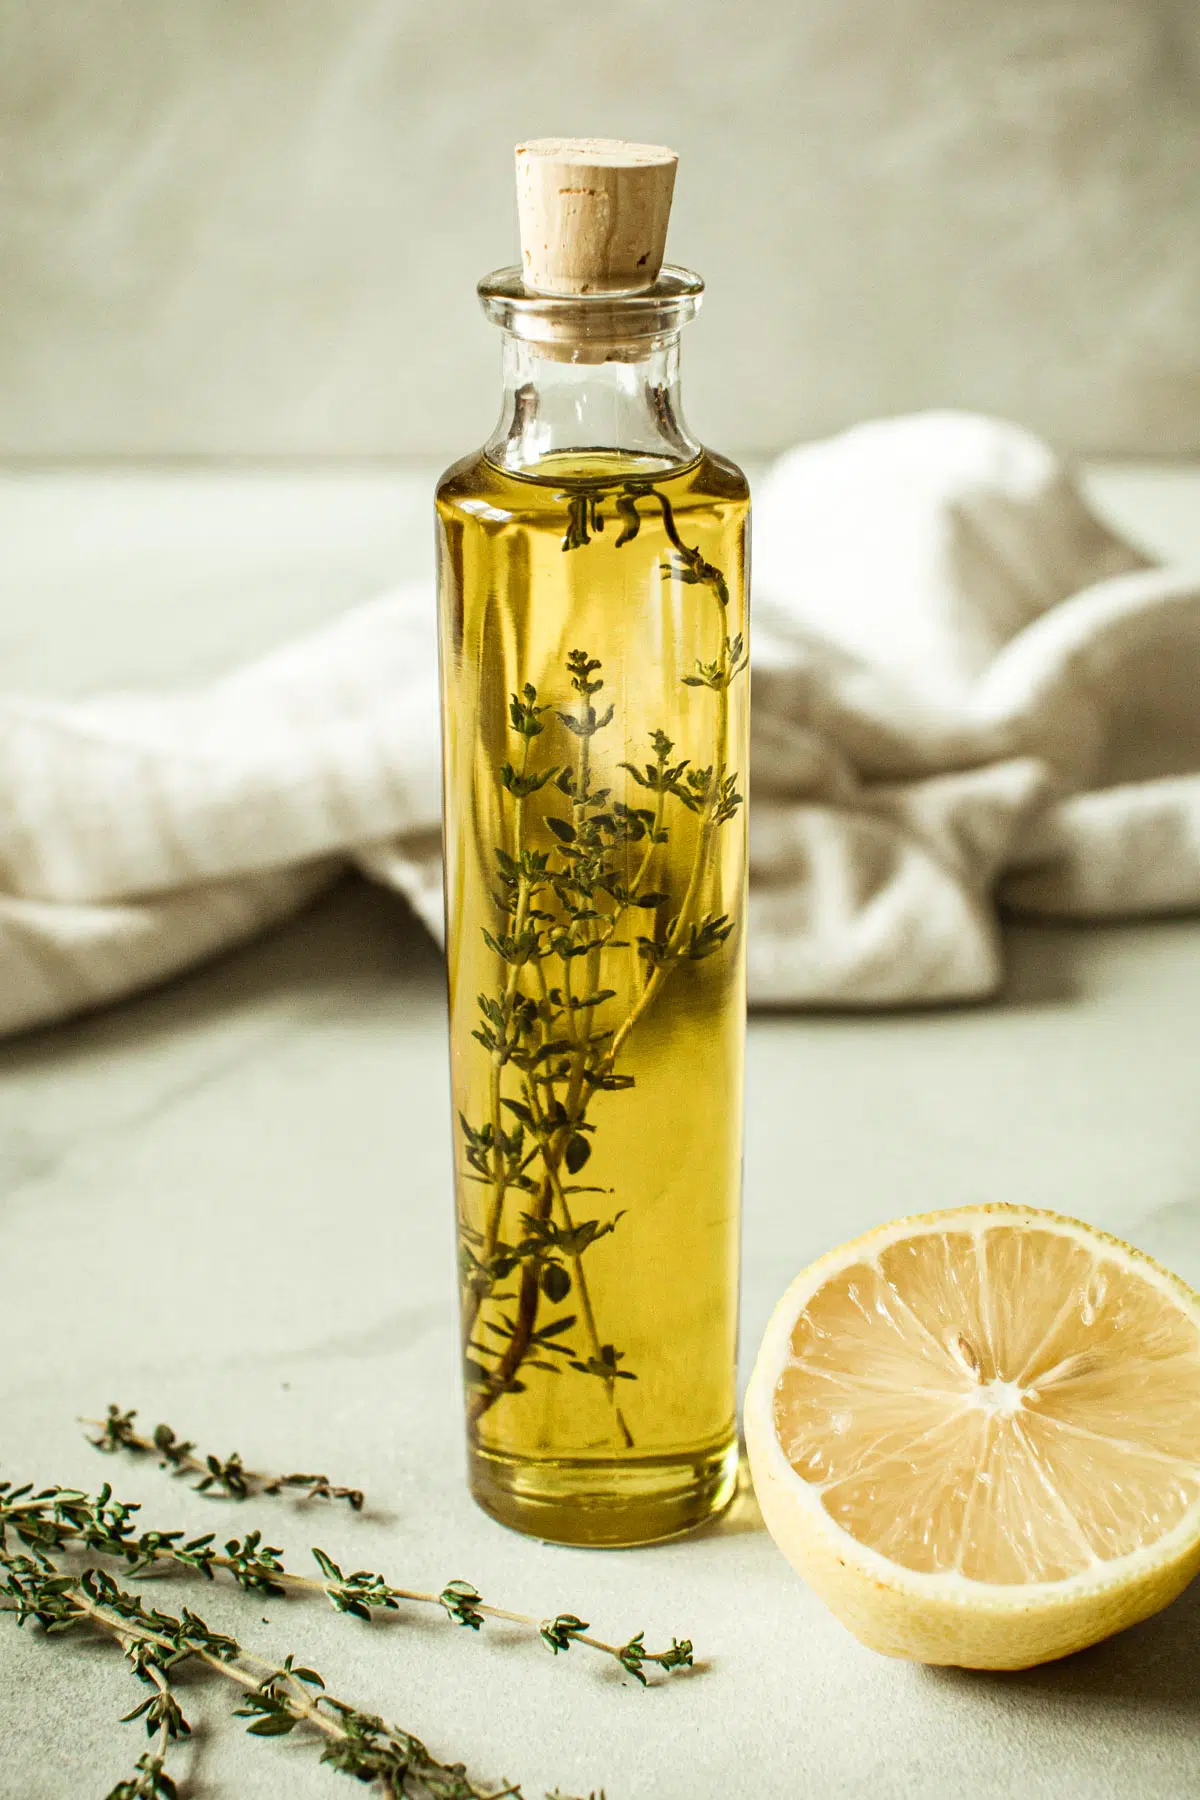 Lemon thyme infused olive oil in a bottle with a cork stopper.